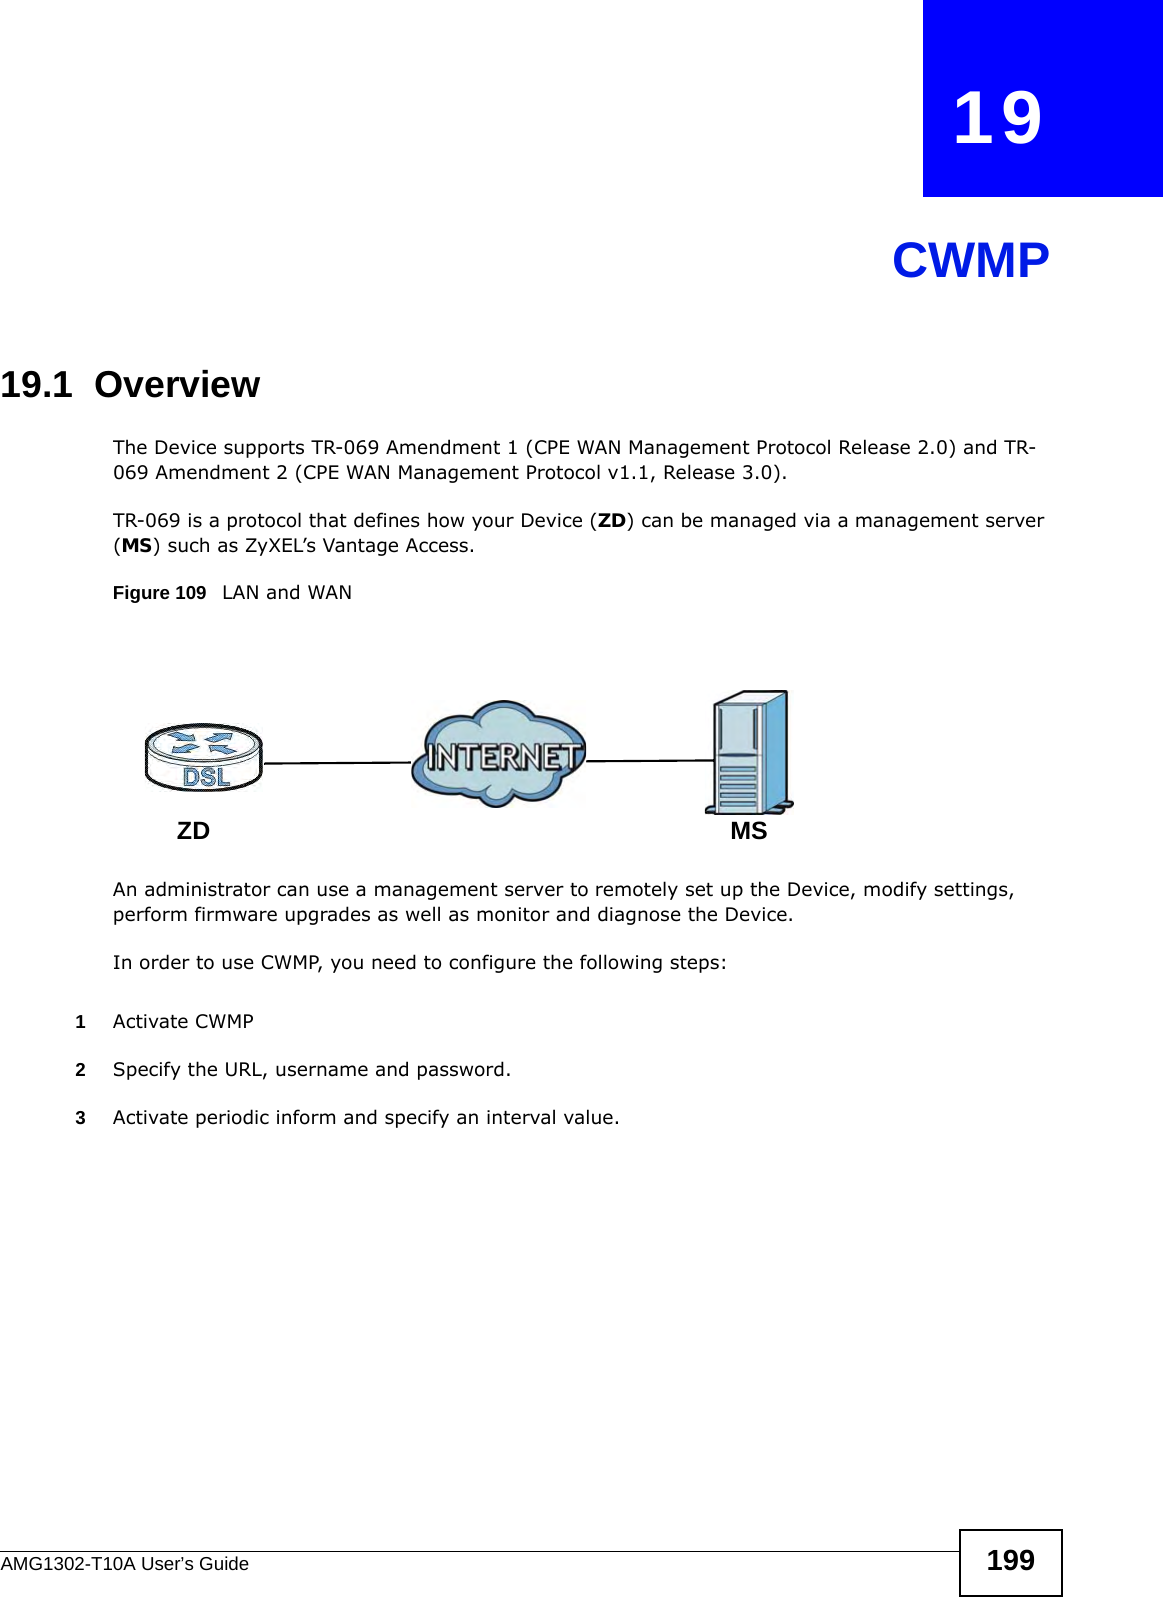 AMG1302-T10A User’s Guide 199CHAPTER   19CWMP19.1  OverviewThe Device supports TR-069 Amendment 1 (CPE WAN Management Protocol Release 2.0) and TR-069 Amendment 2 (CPE WAN Management Protocol v1.1, Release 3.0).TR-069 is a protocol that defines how your Device (ZD) can be managed via a management server (MS) such as ZyXEL’s Vantage Access. Figure 109   LAN and WANAn administrator can use a management server to remotely set up the Device, modify settings, perform firmware upgrades as well as monitor and diagnose the Device. In order to use CWMP, you need to configure the following steps:1Activate CWMP2Specify the URL, username and password.3Activate periodic inform and specify an interval value.MSZD